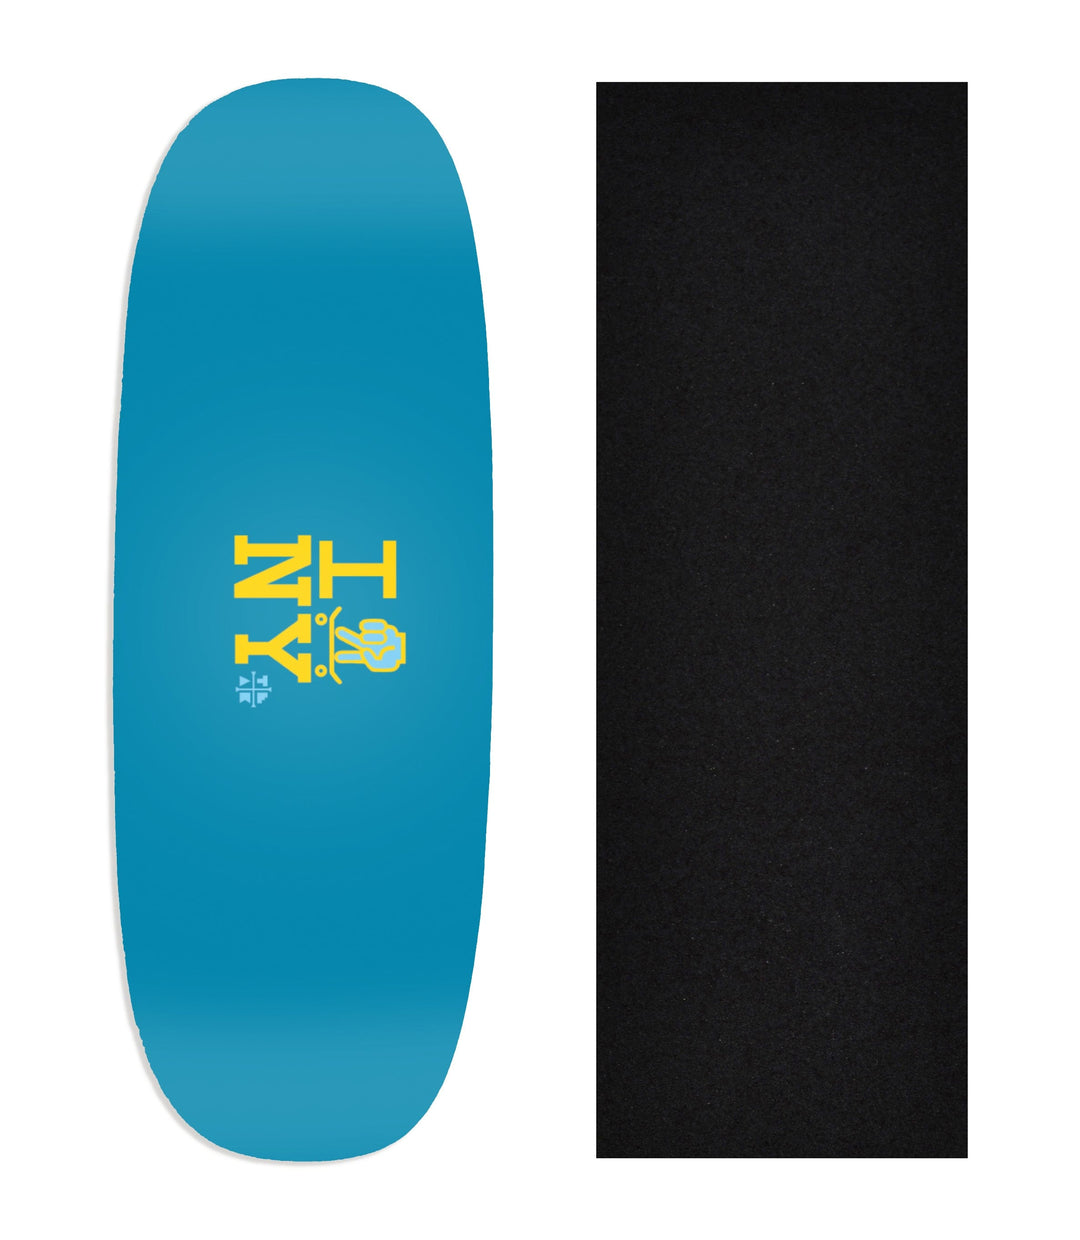 Teak Tuning Heat Transfer Graphic Wooden Fingerboard Deck, "I Skate NY" (Blue) Ohhh Deck